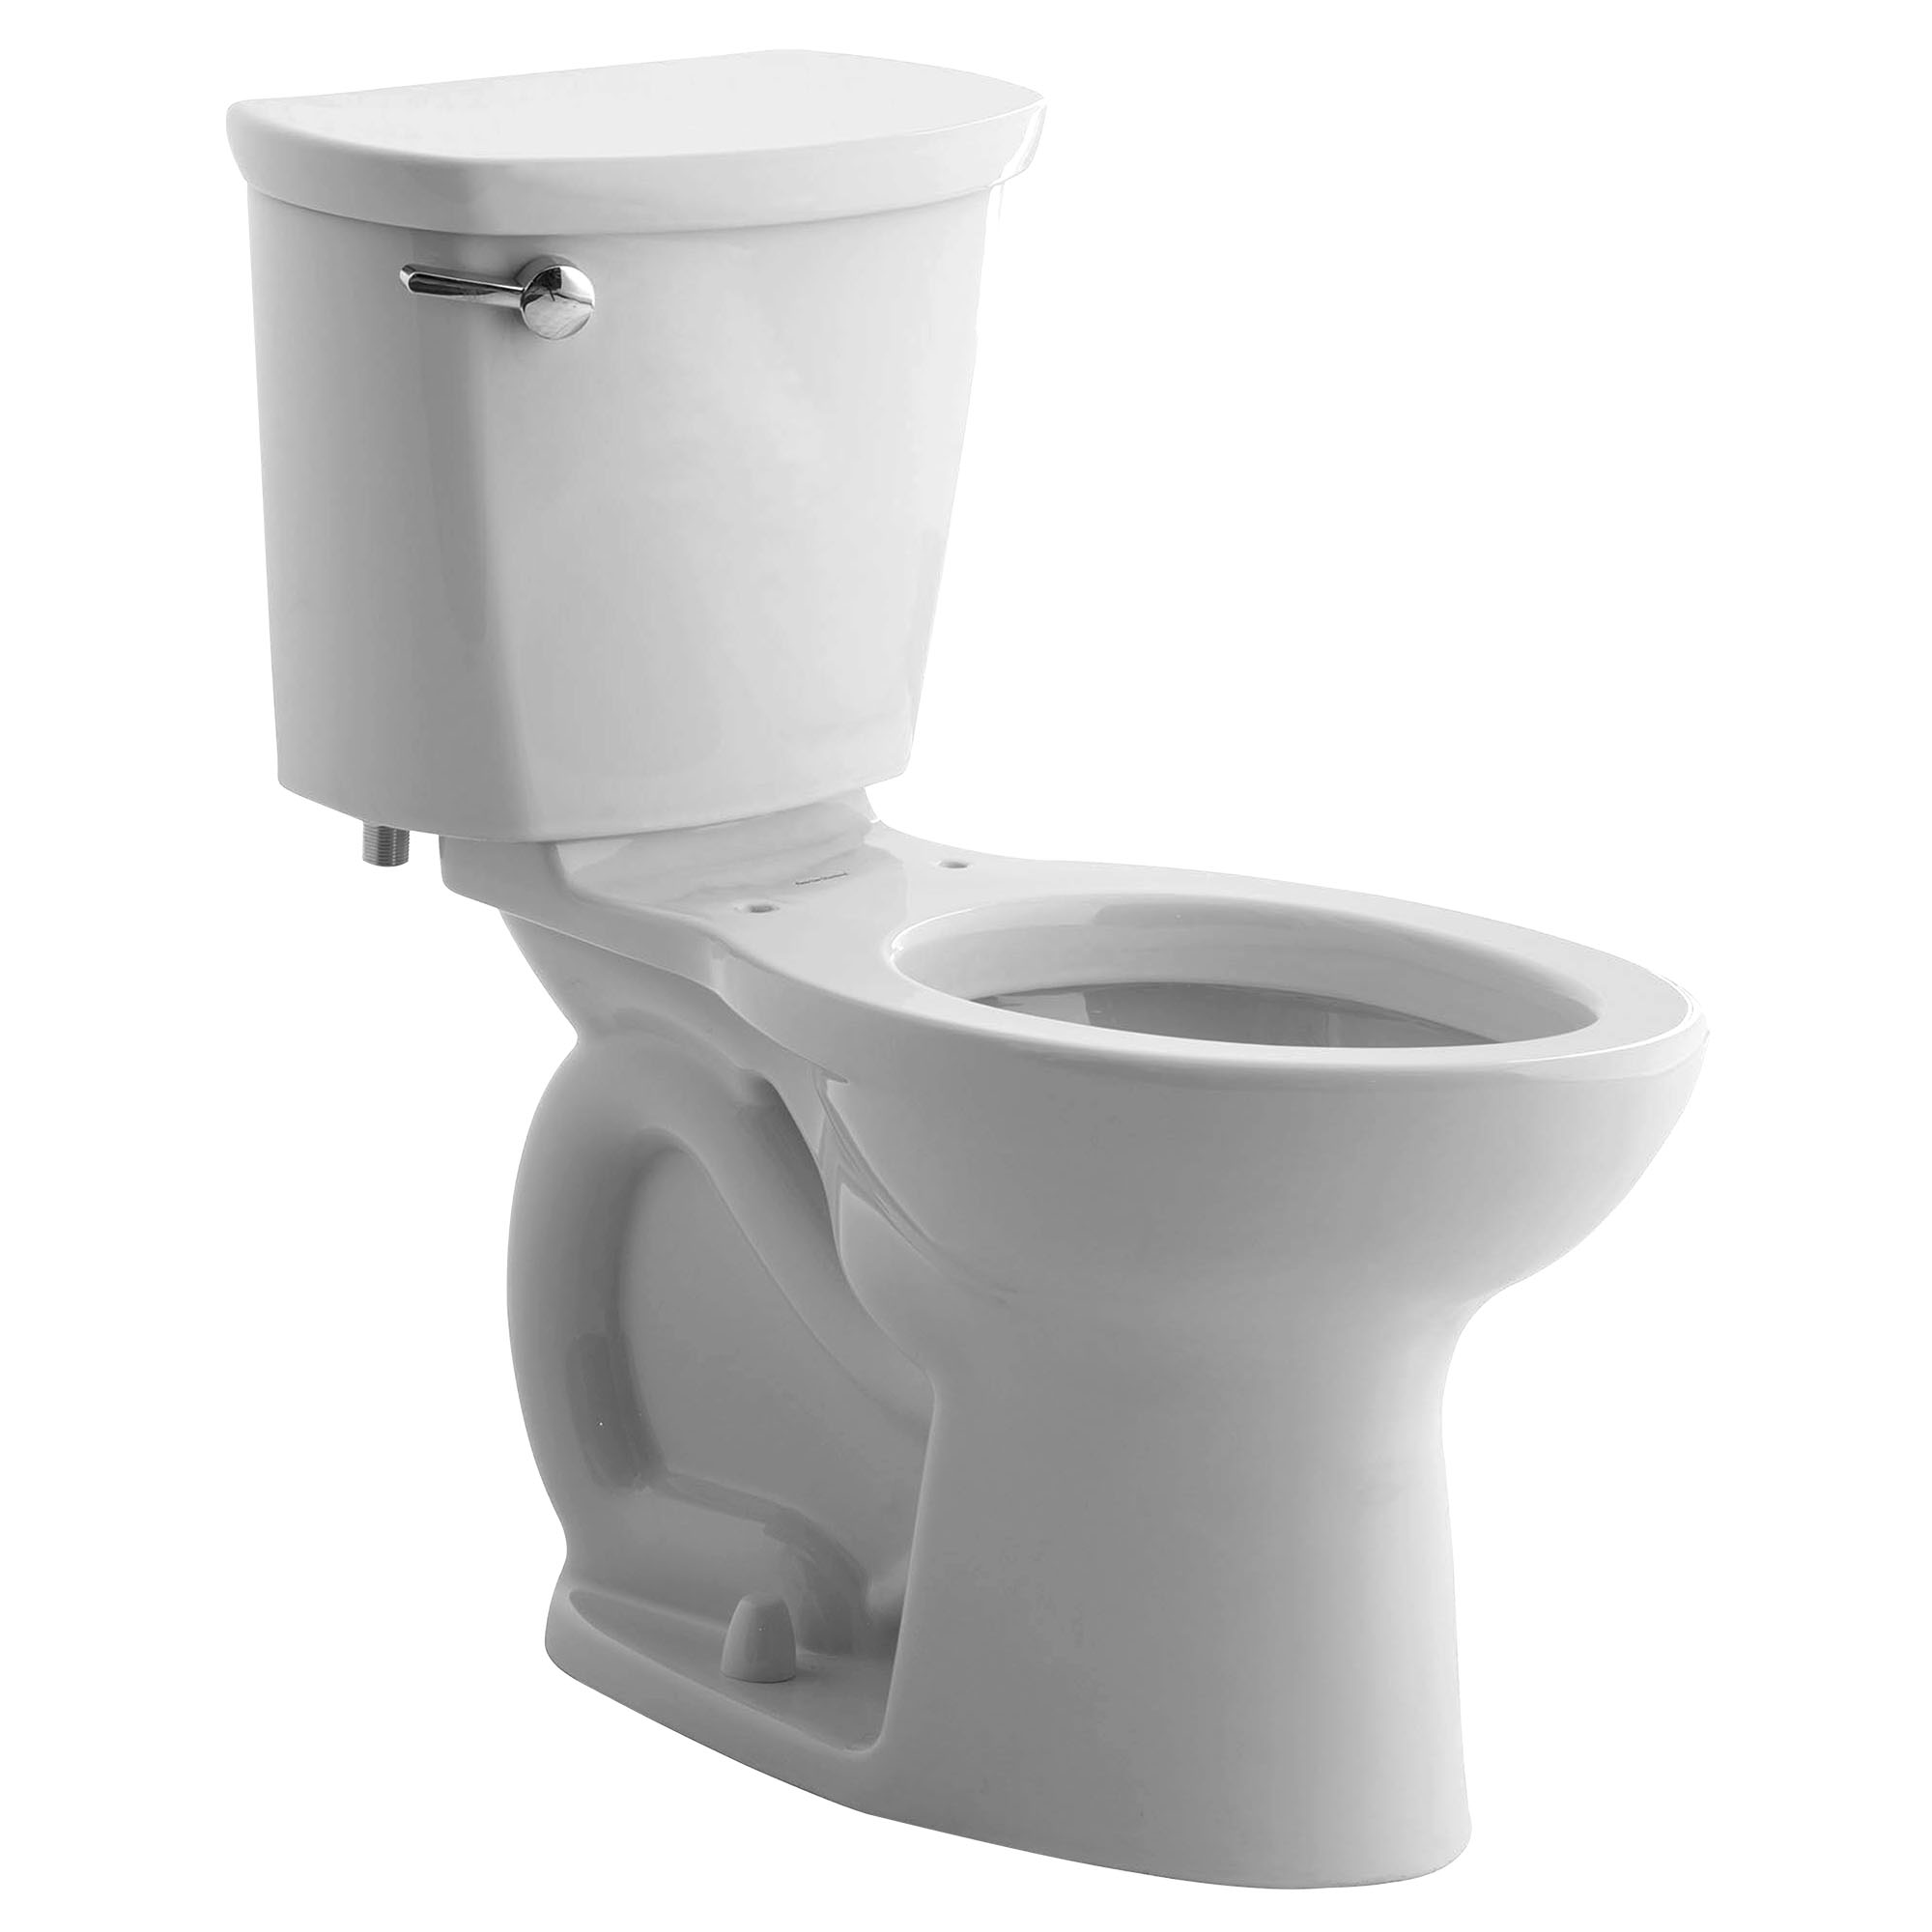 Champion PRO Two-Piece 1.6 gpf/6.0 Lpf Chair Height Elongated Right Hand Trip Lever Toilet less Seat